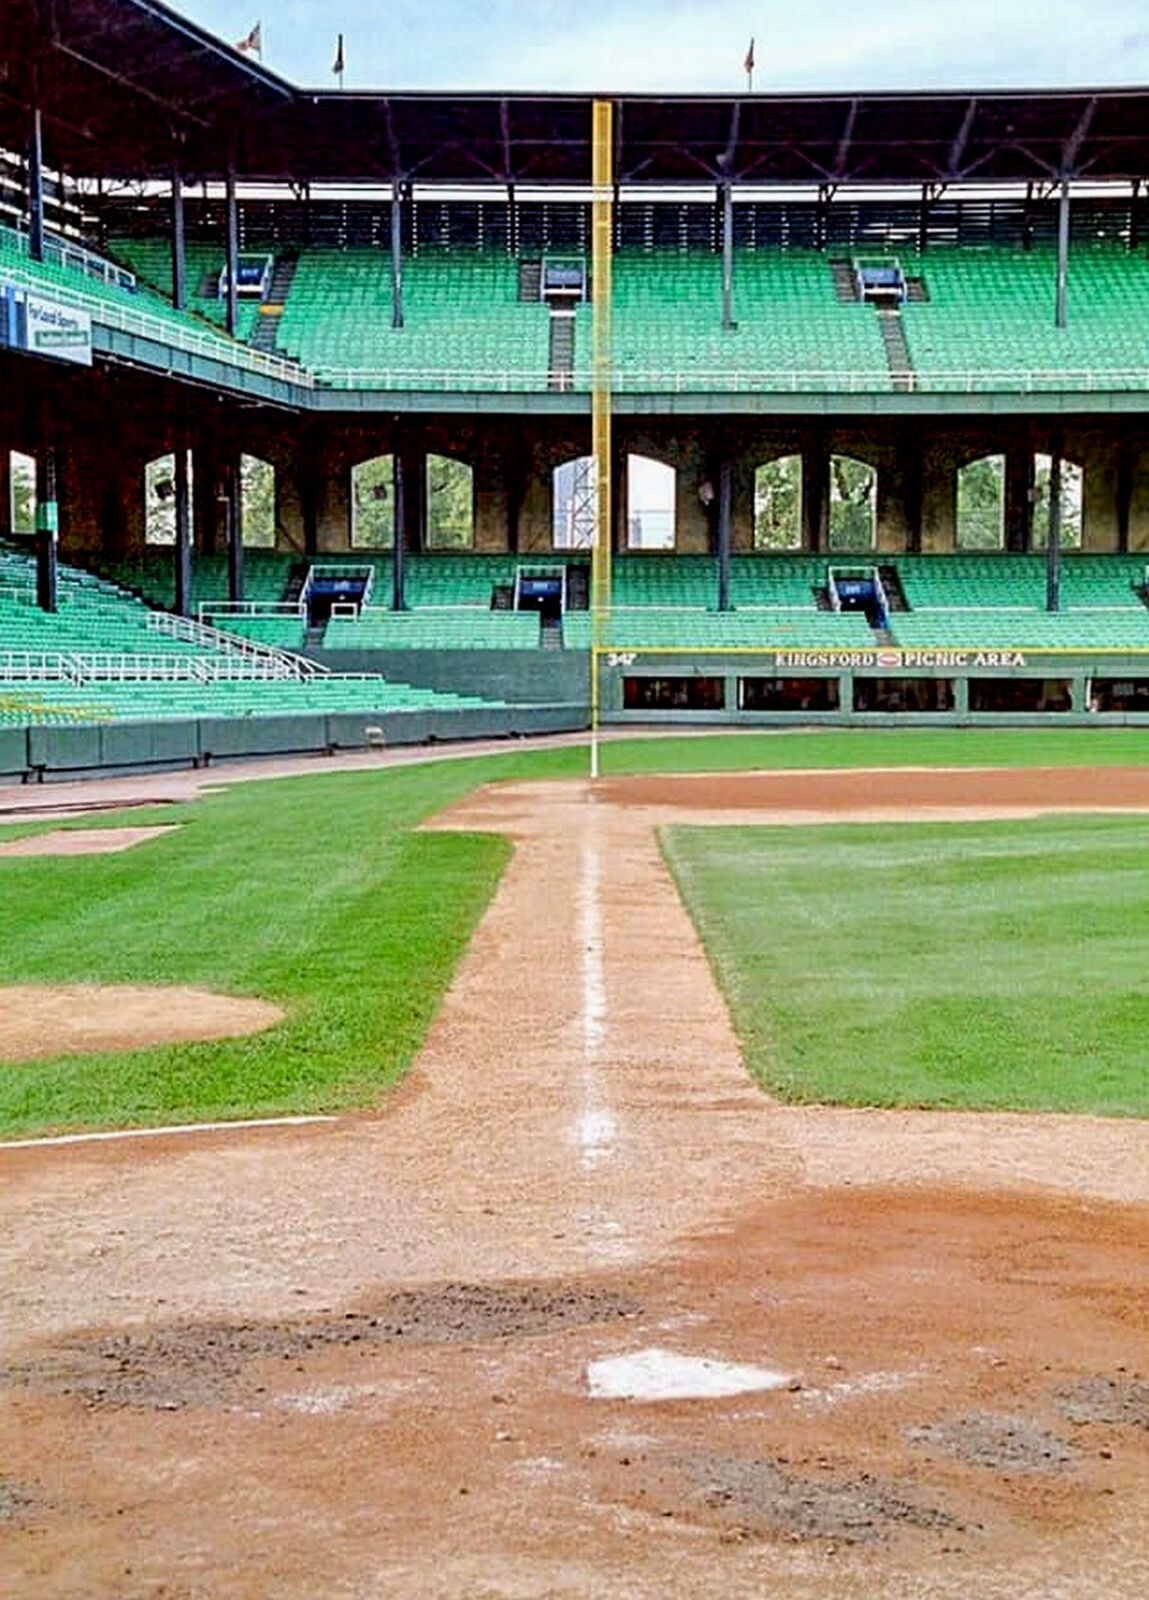 OLD COMISKEY PARK View Down 3rd Base Line PHOTO (200-v)